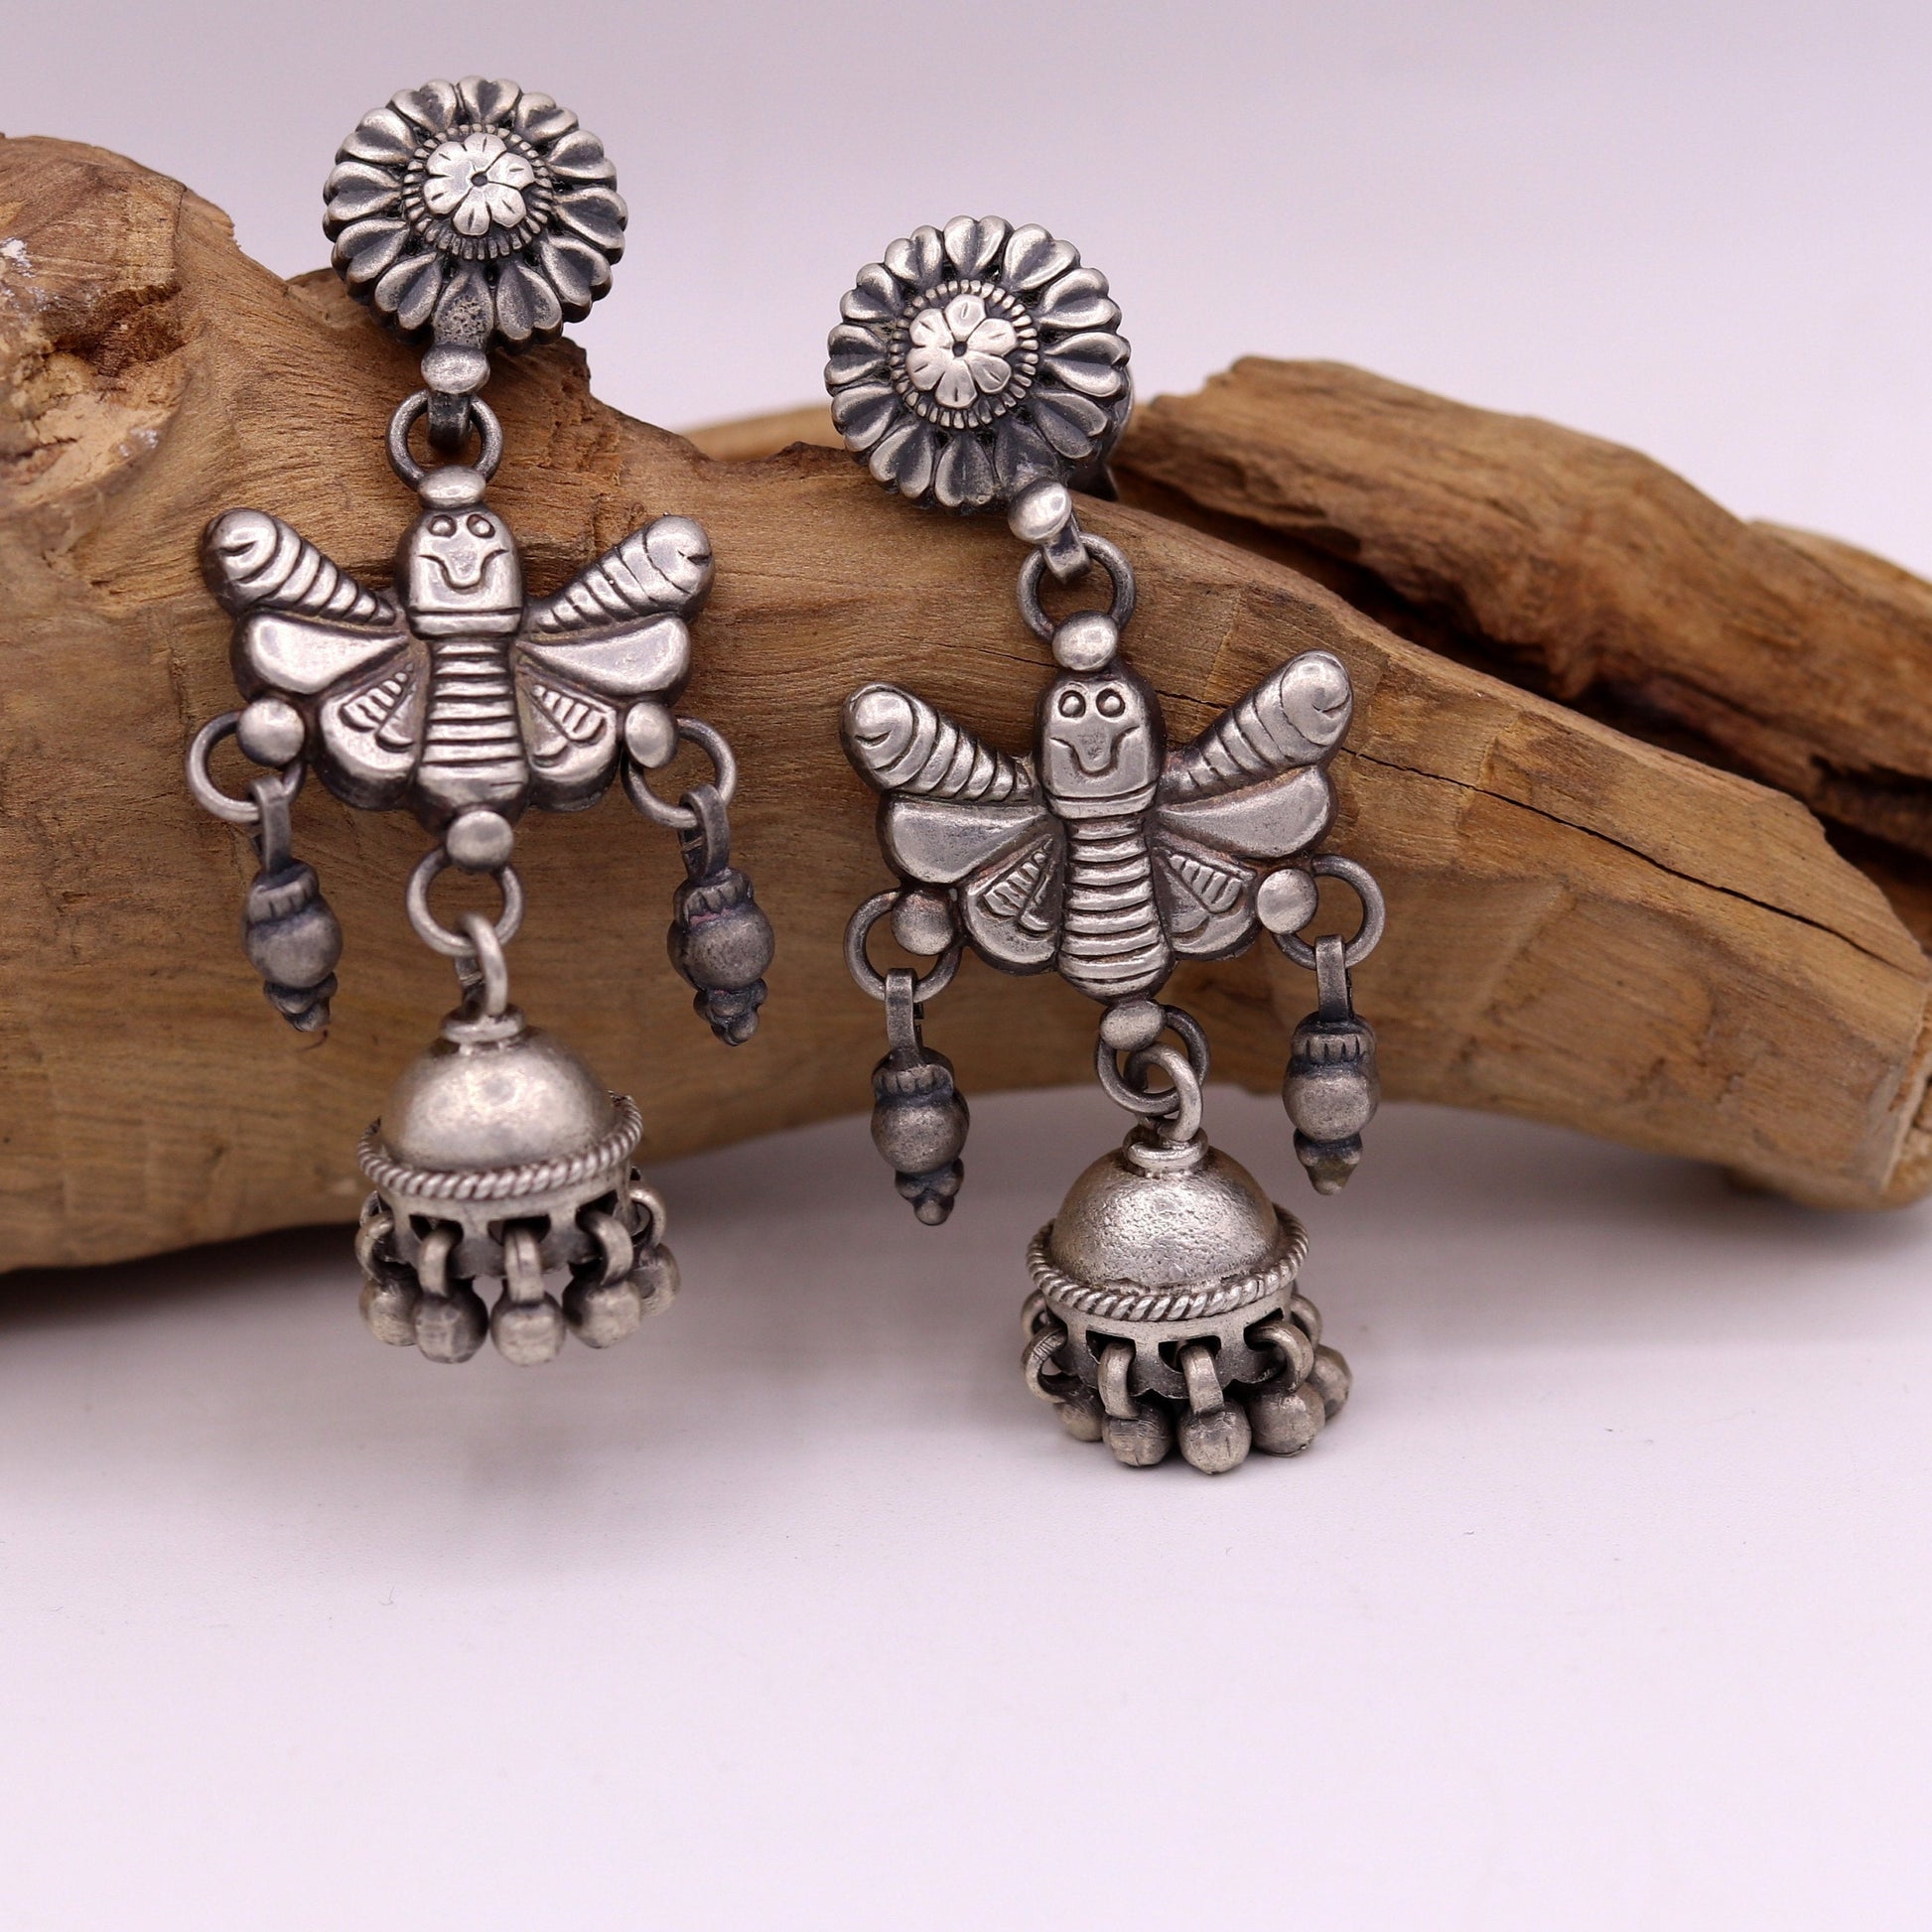 925 sterling silver fabulous butterfly design handmade stud earrings awesome wedding party girl's earrings tribal jewelry India s456 - TRIBAL ORNAMENTS